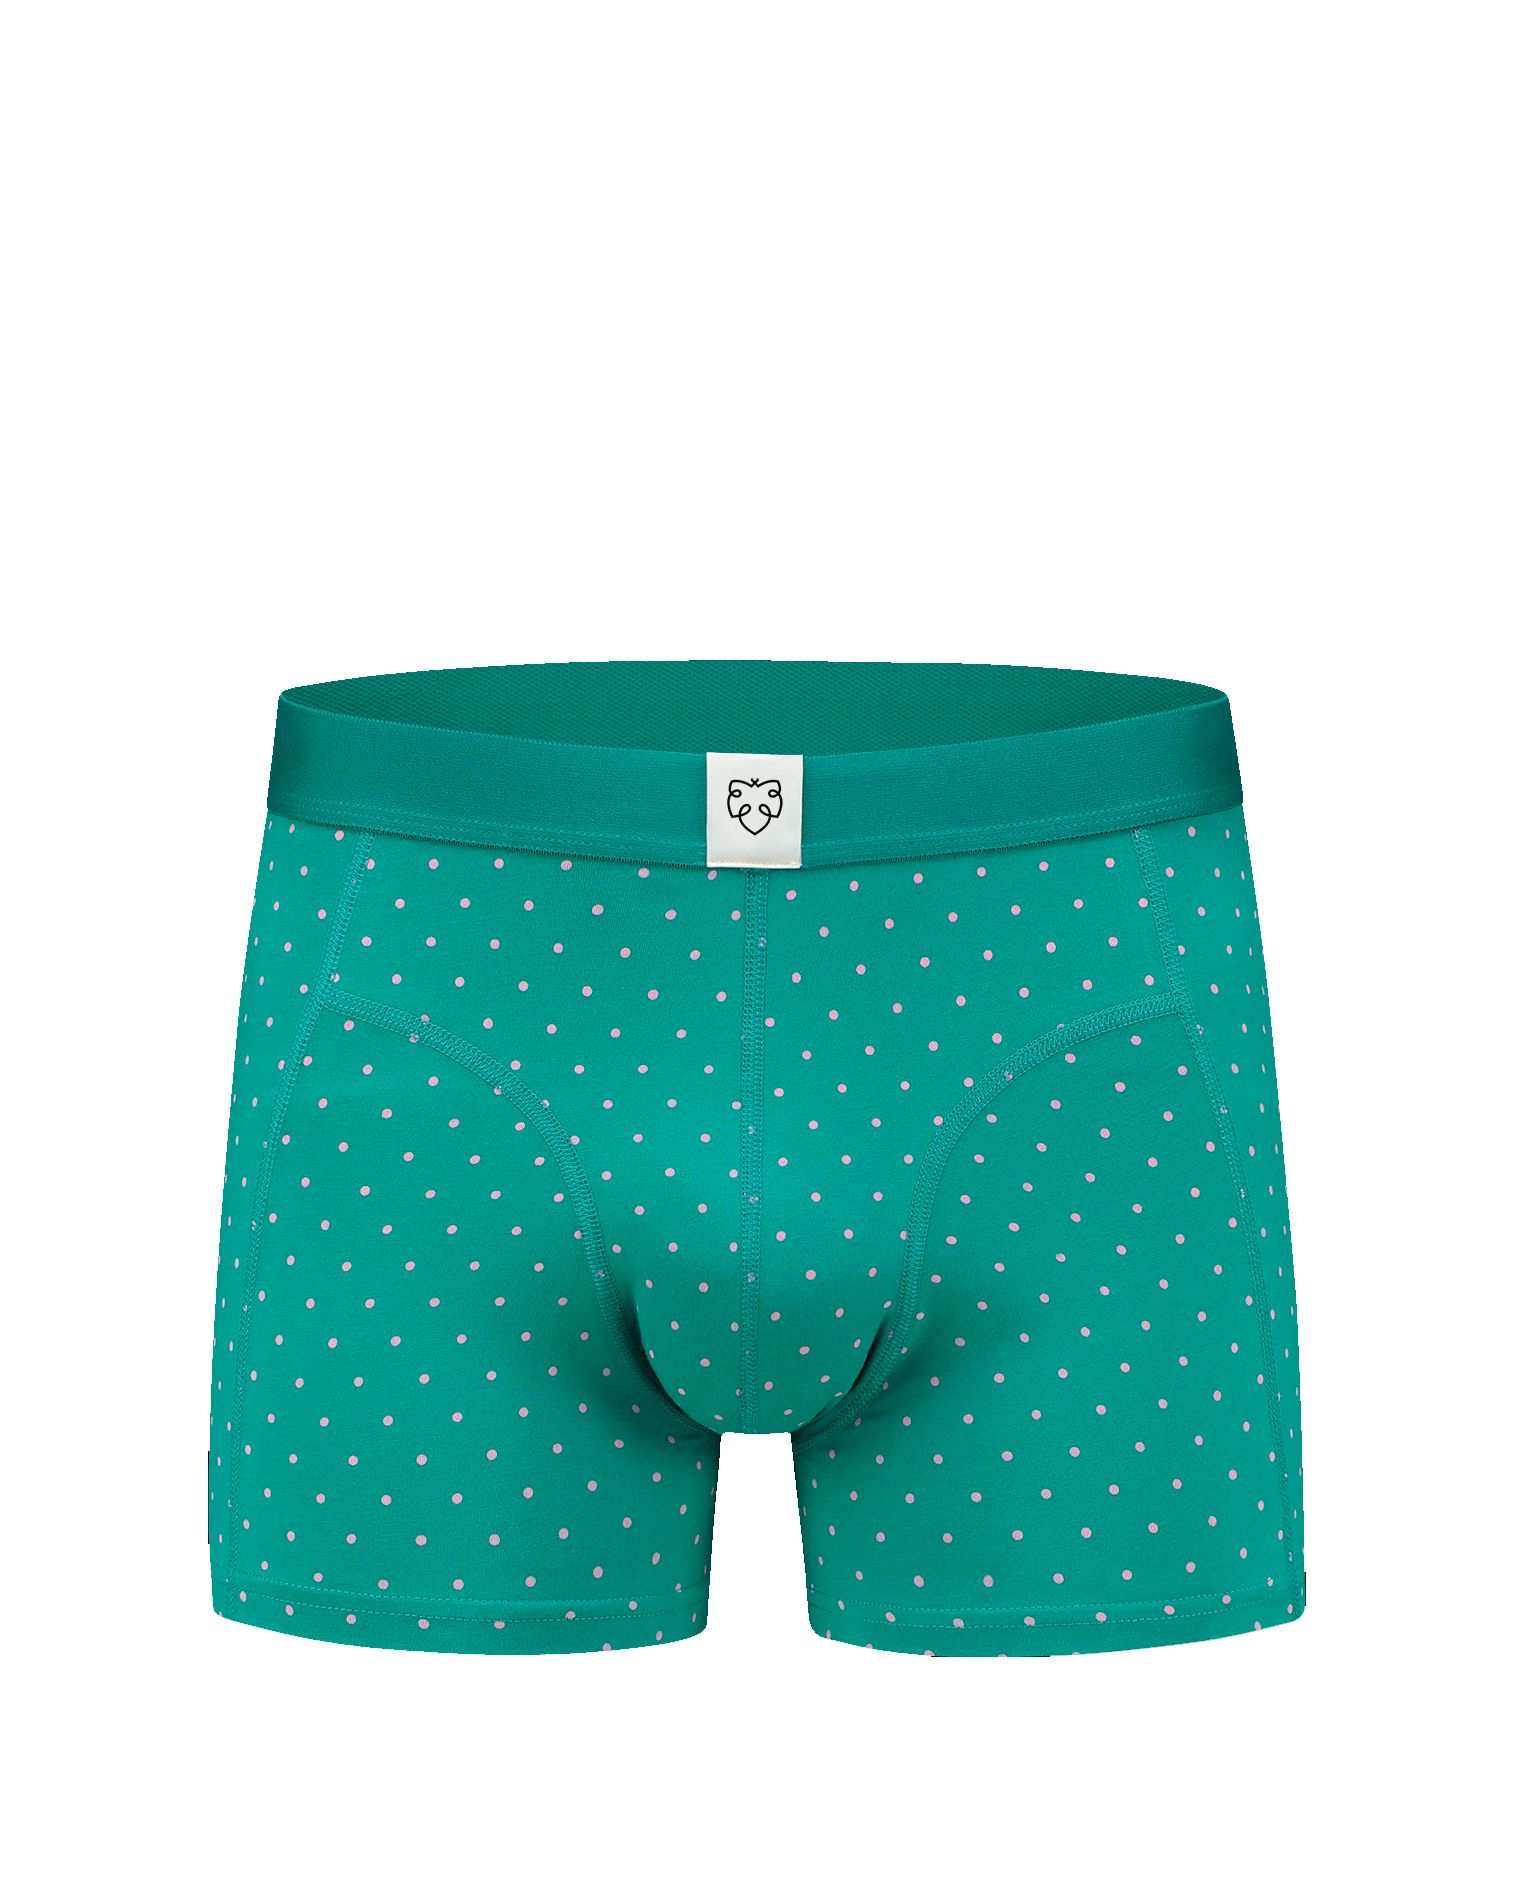 https://jerone.com/images/product/9991_Fred-Underwear-A-Dam_4002.jpg